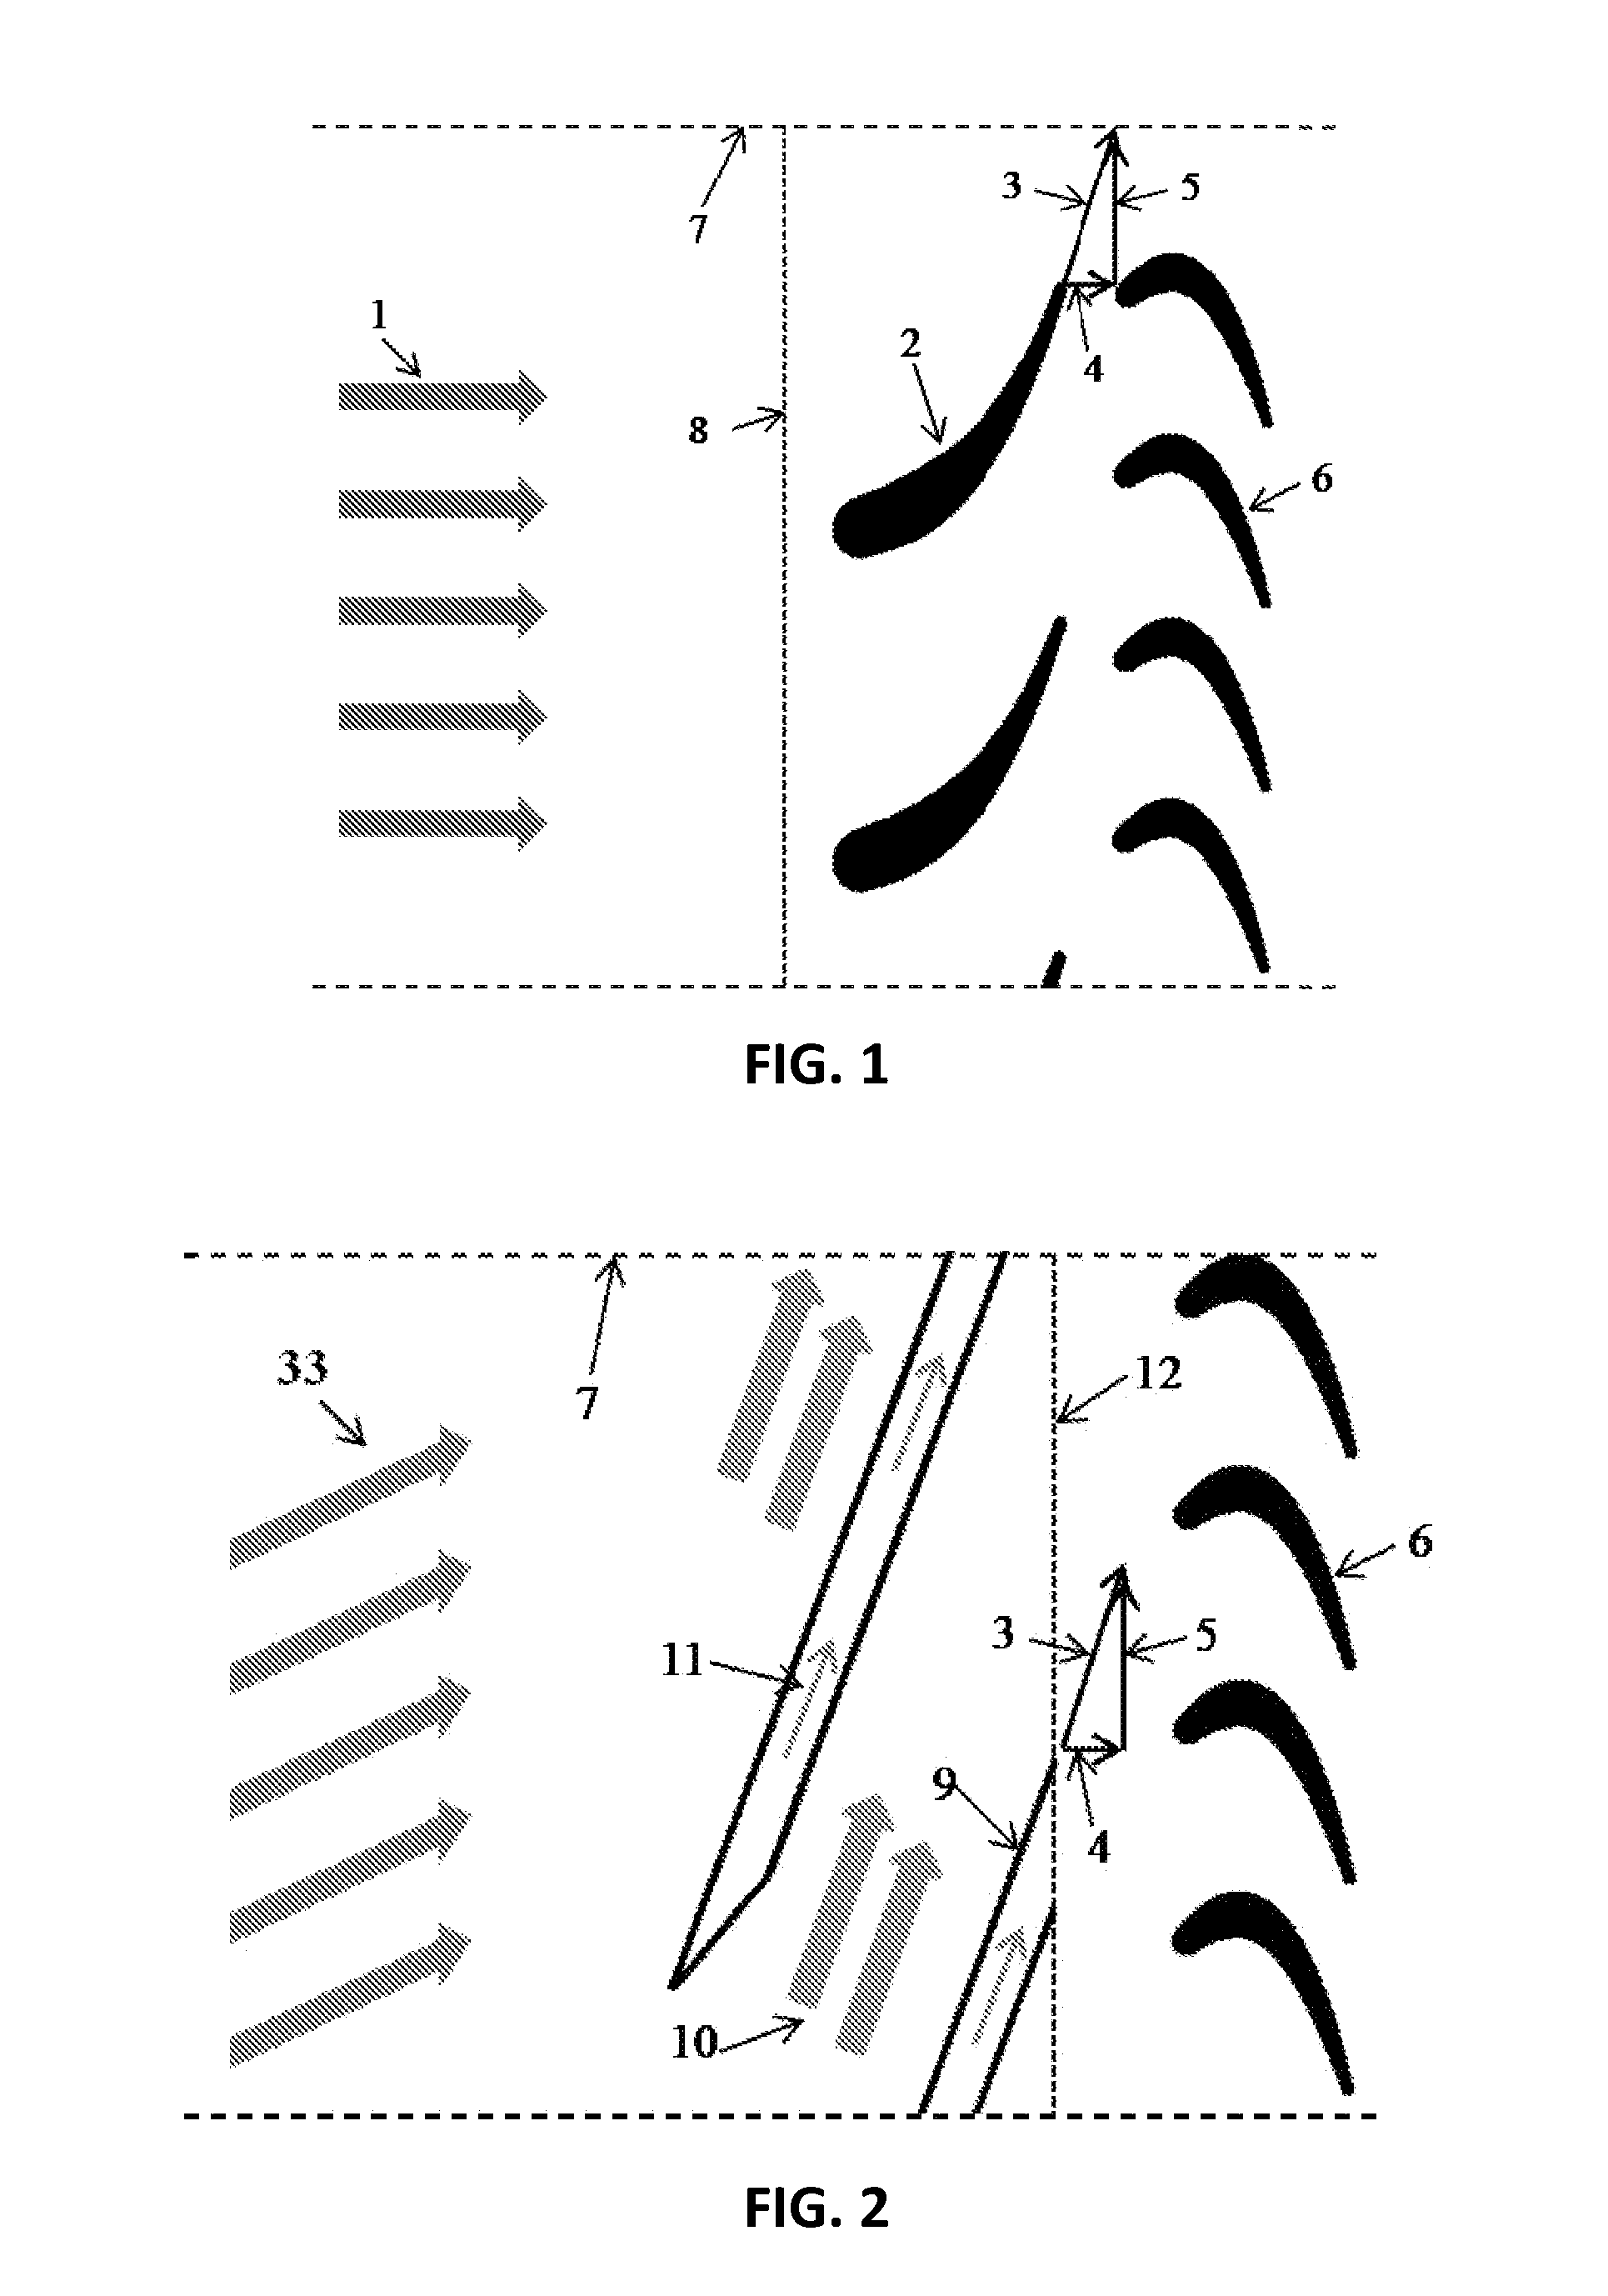 Tangential combustor with vaneless turbine for use on gas turbine engines